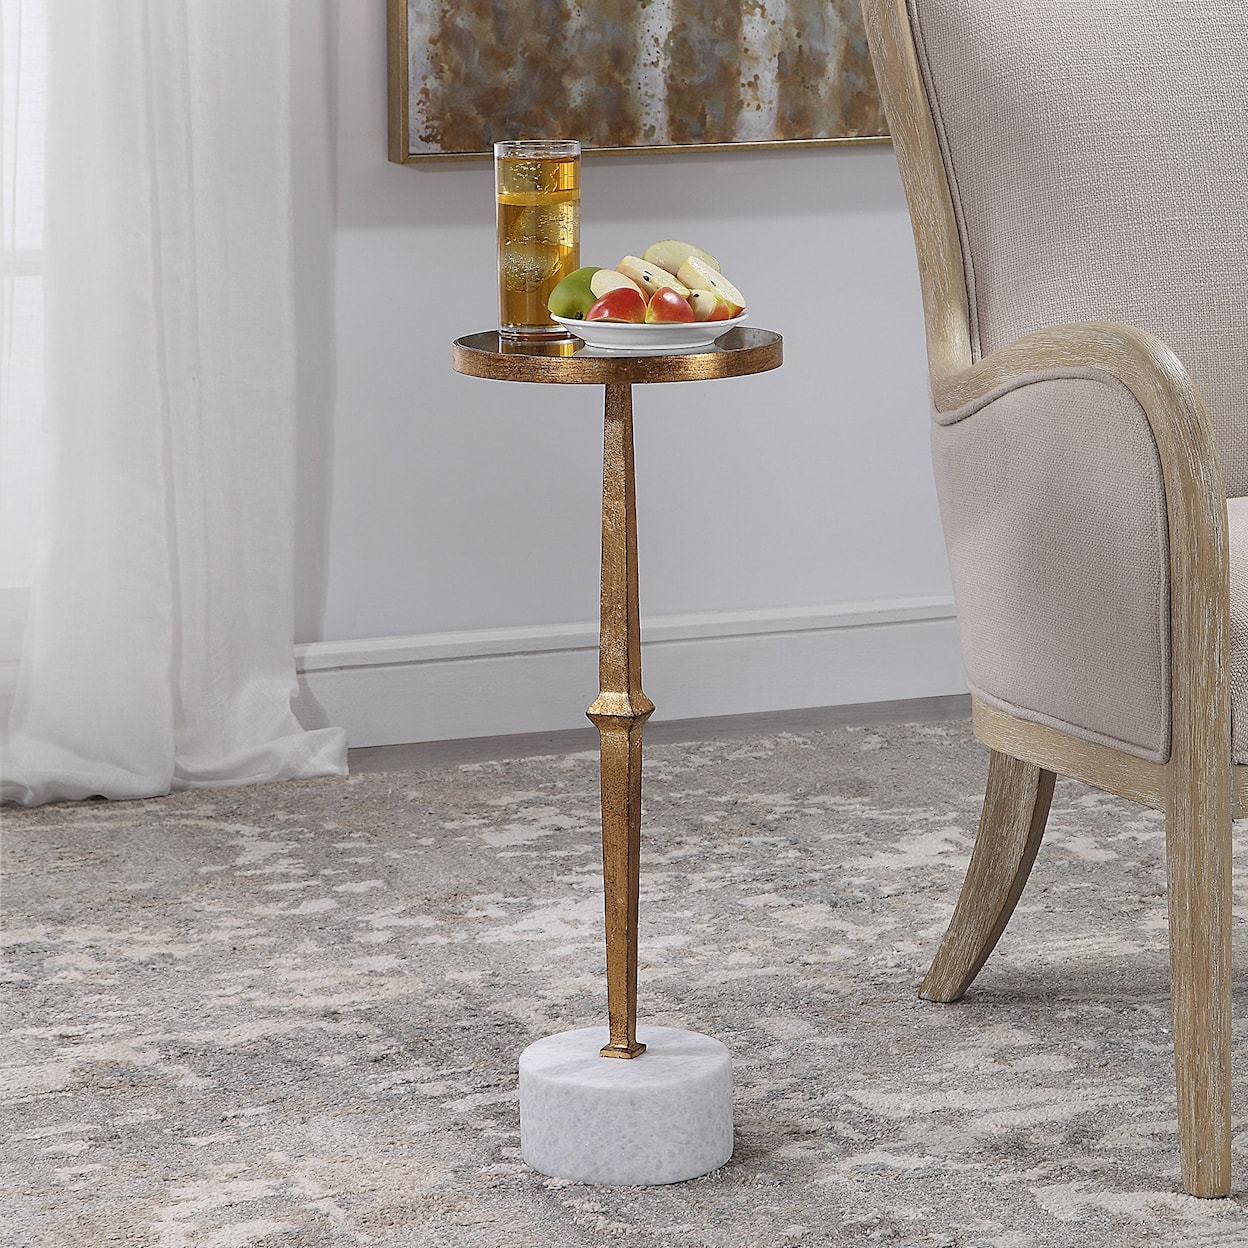 Uttermost Accent Furniture - Occasional Tables Miriam Round Accent Table